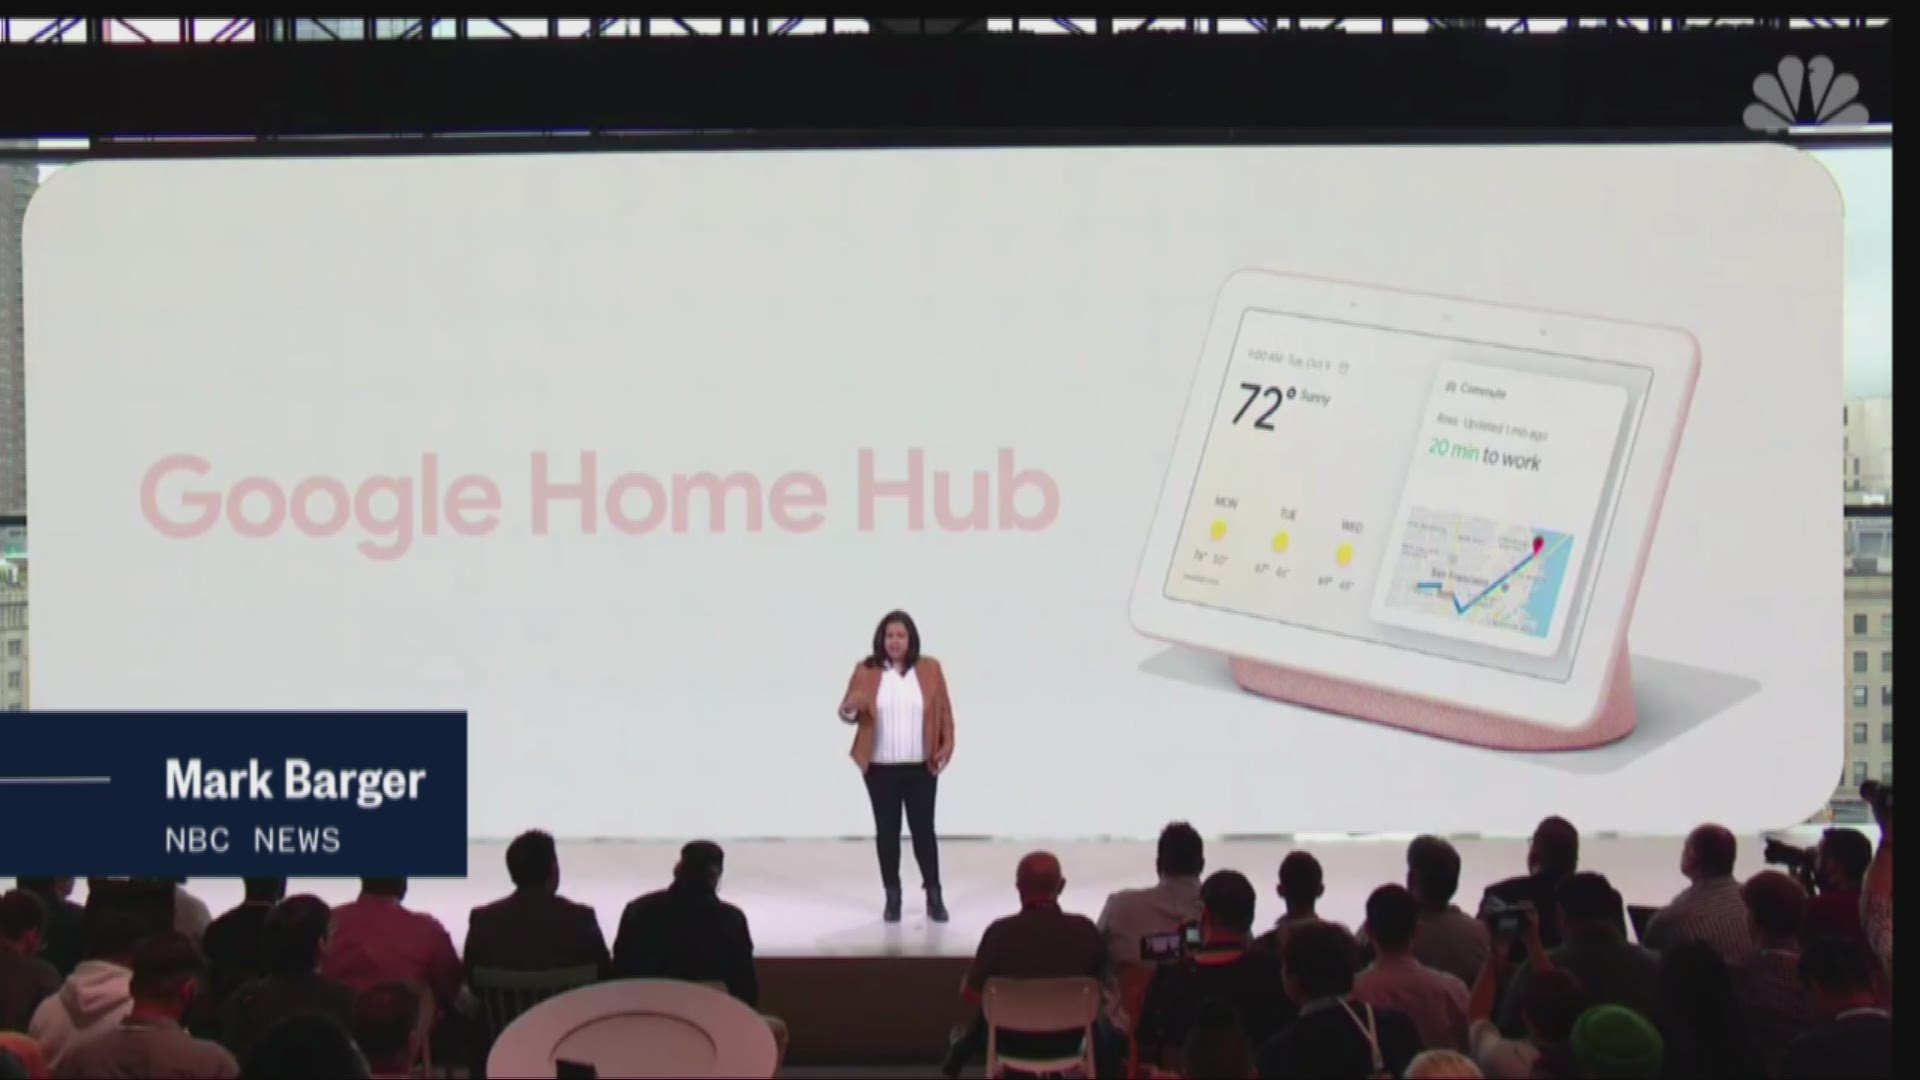 Google launches new "Home Hub" smart speaker and digital assistant, a direct competitor to Amazon's Echo and Facebook's Portal.